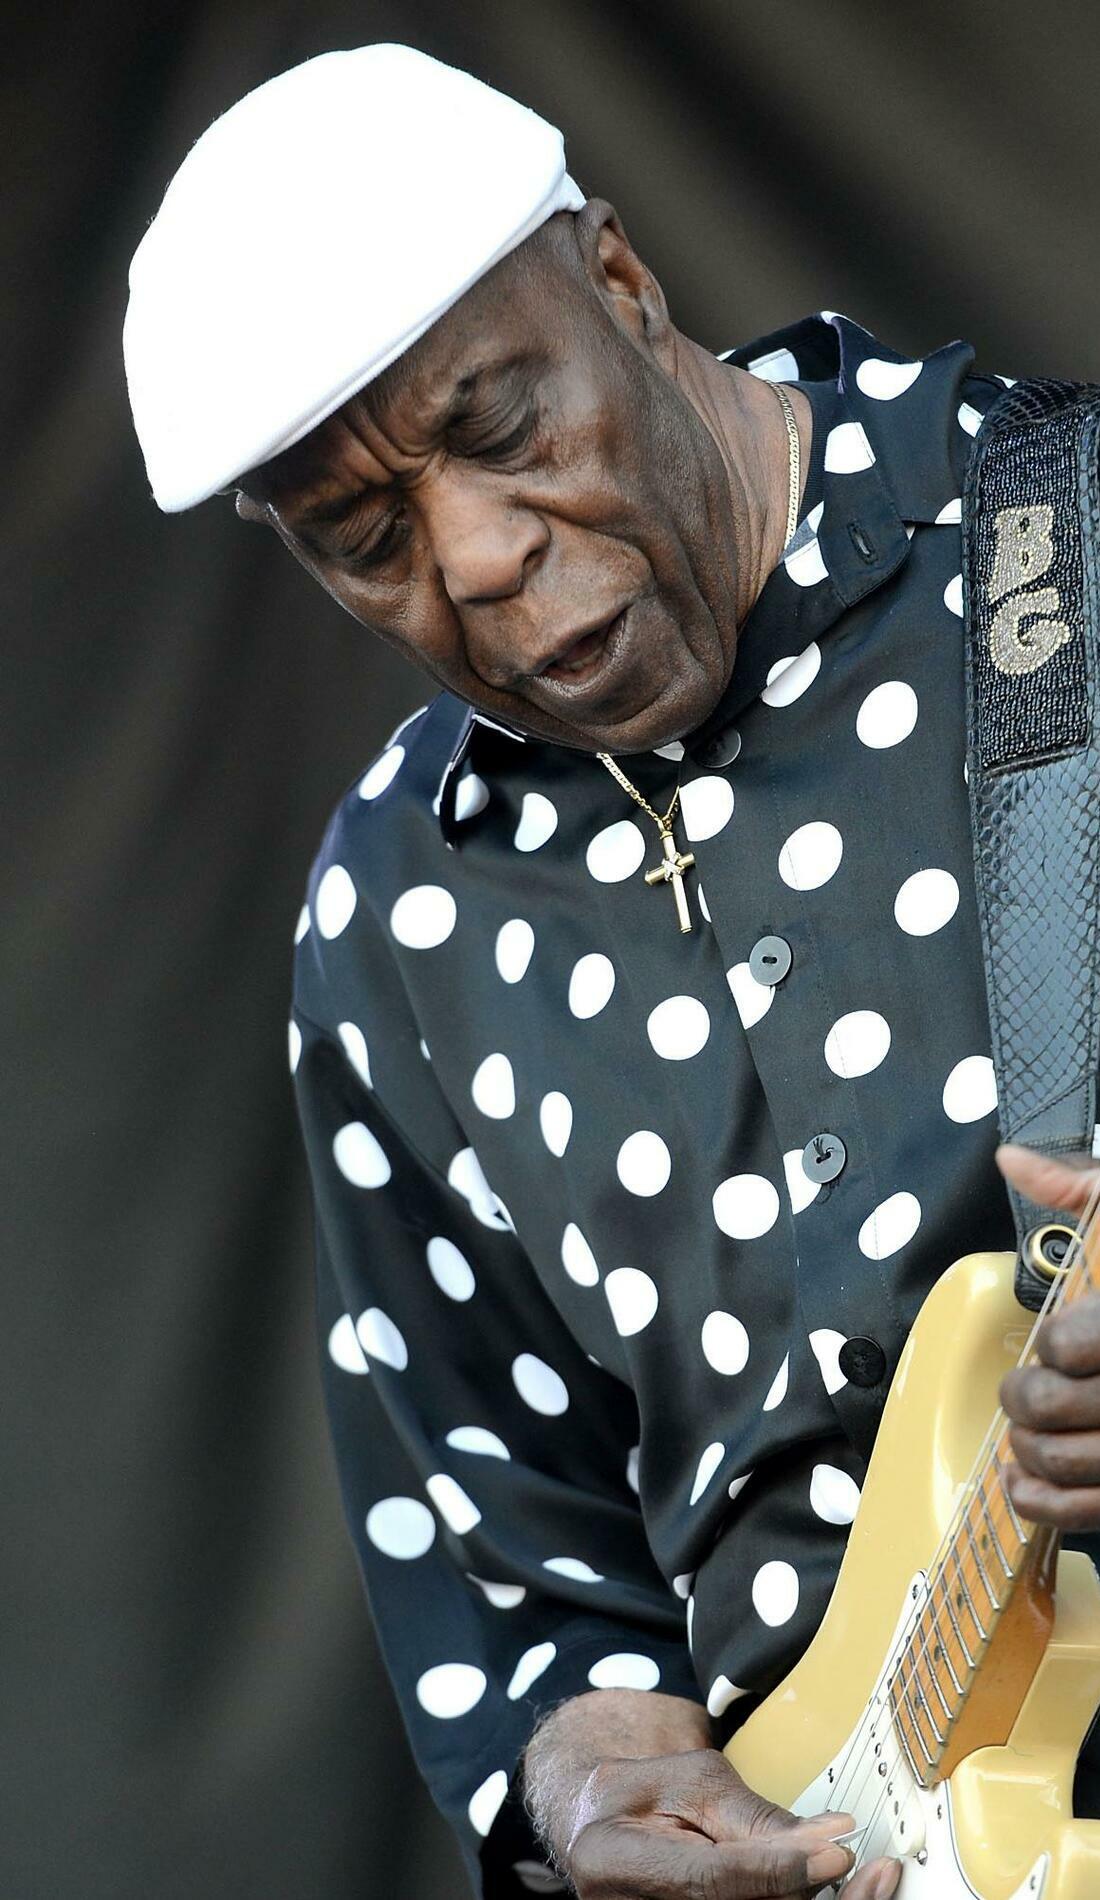 A Buddy Guy live event